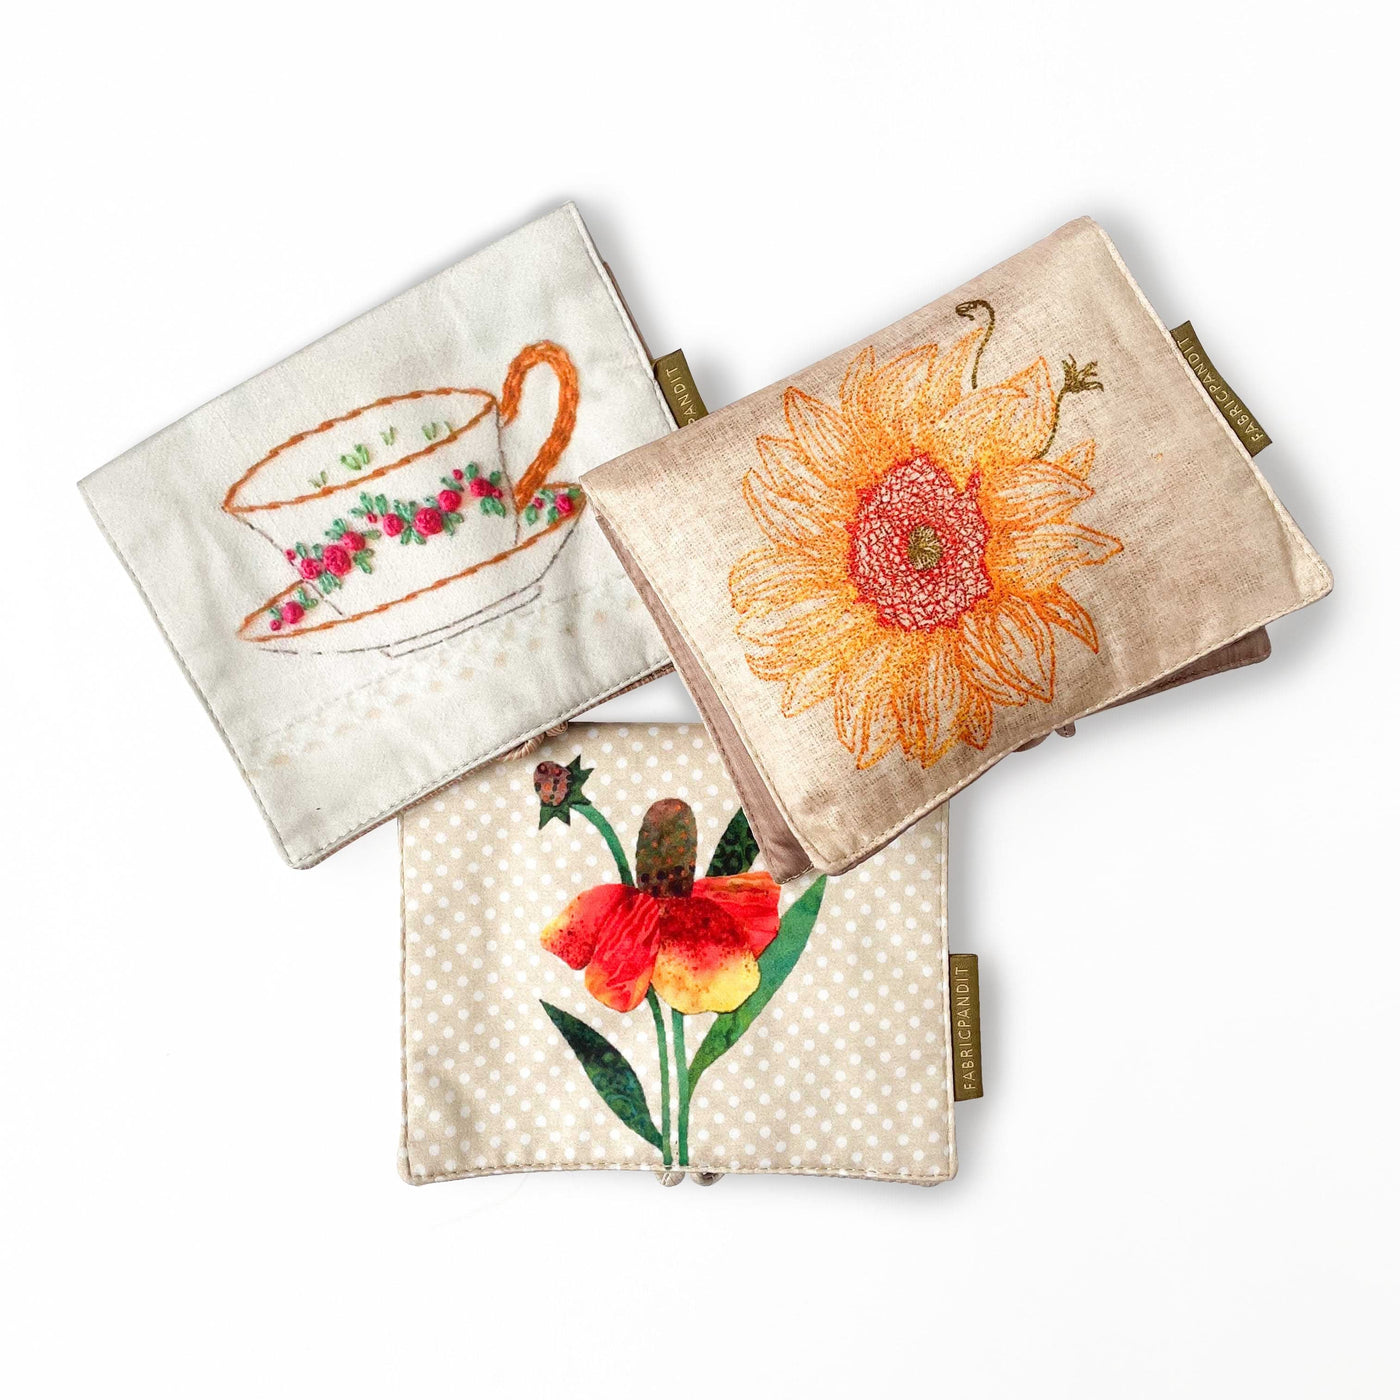 Pack of 3 Padmate Padmate PADMATE Silk Blend Sanitary Pad Pouch - Thats Very Pretty - Pack of 3